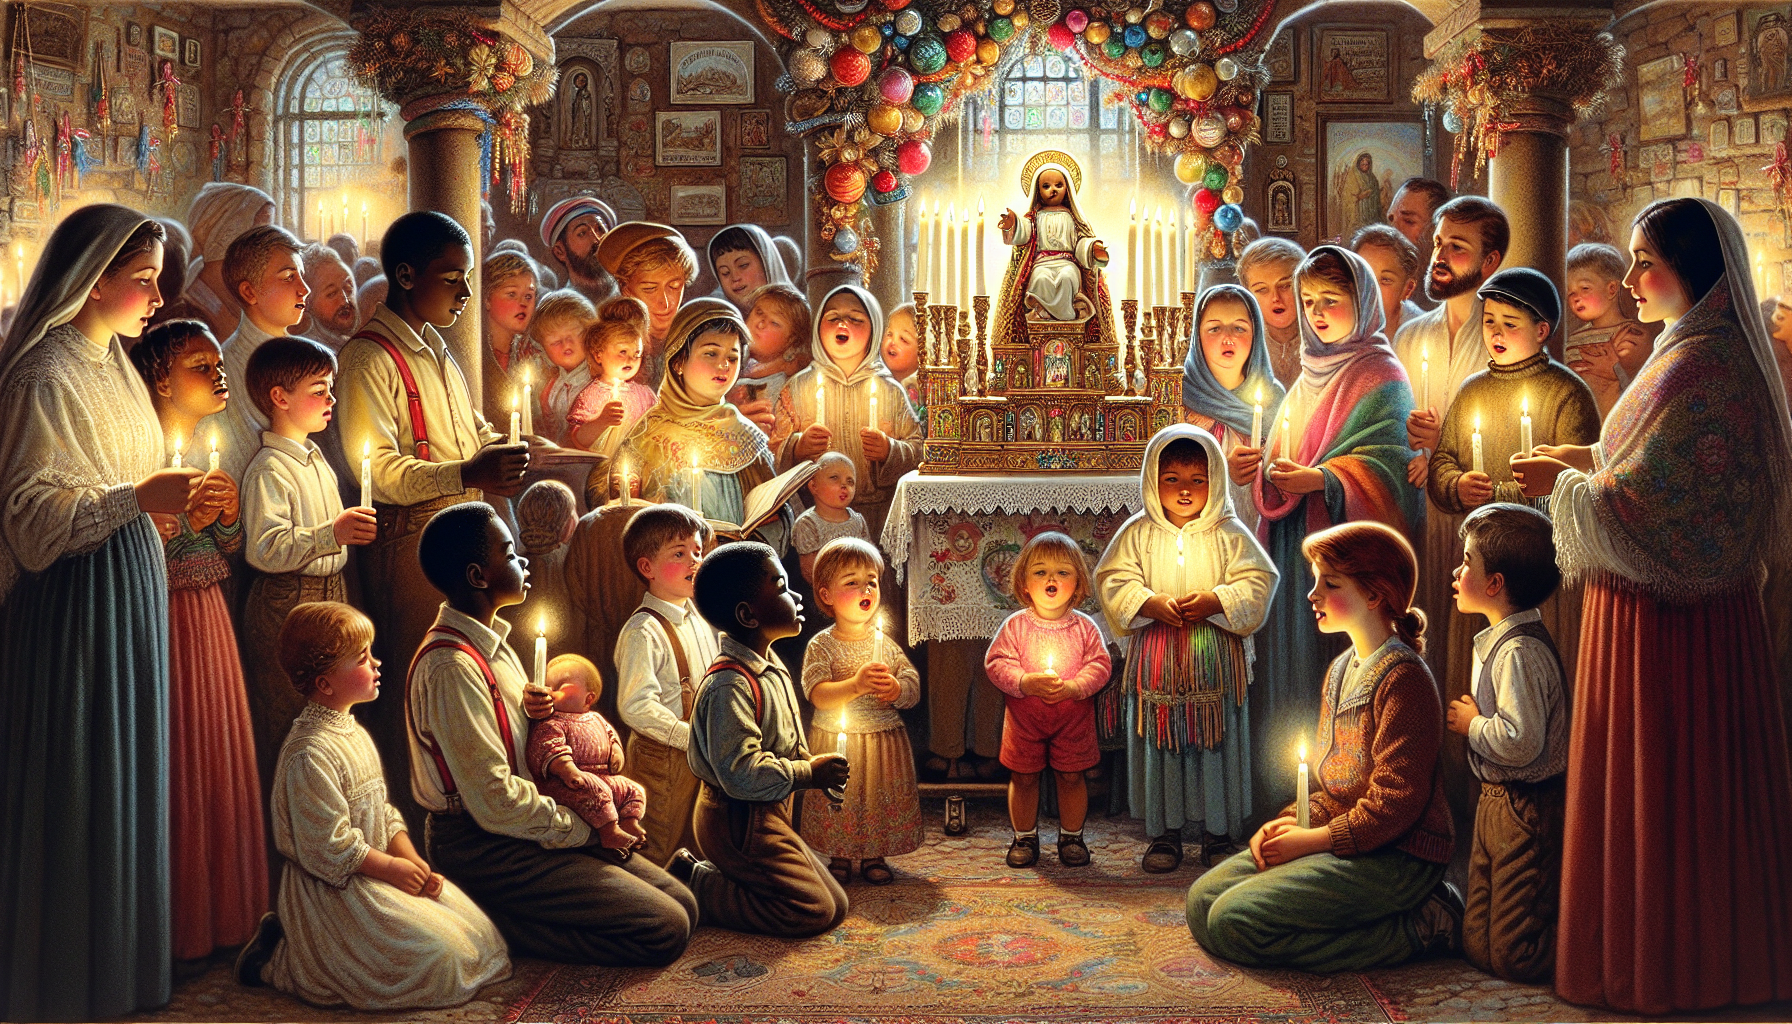 An evocative tableau depicting children and adults from diverse backgrounds gathered in candlelight, singing devotional songs to a beautifully adorned figurine of the Niño Jesús in a rustic, warmly li